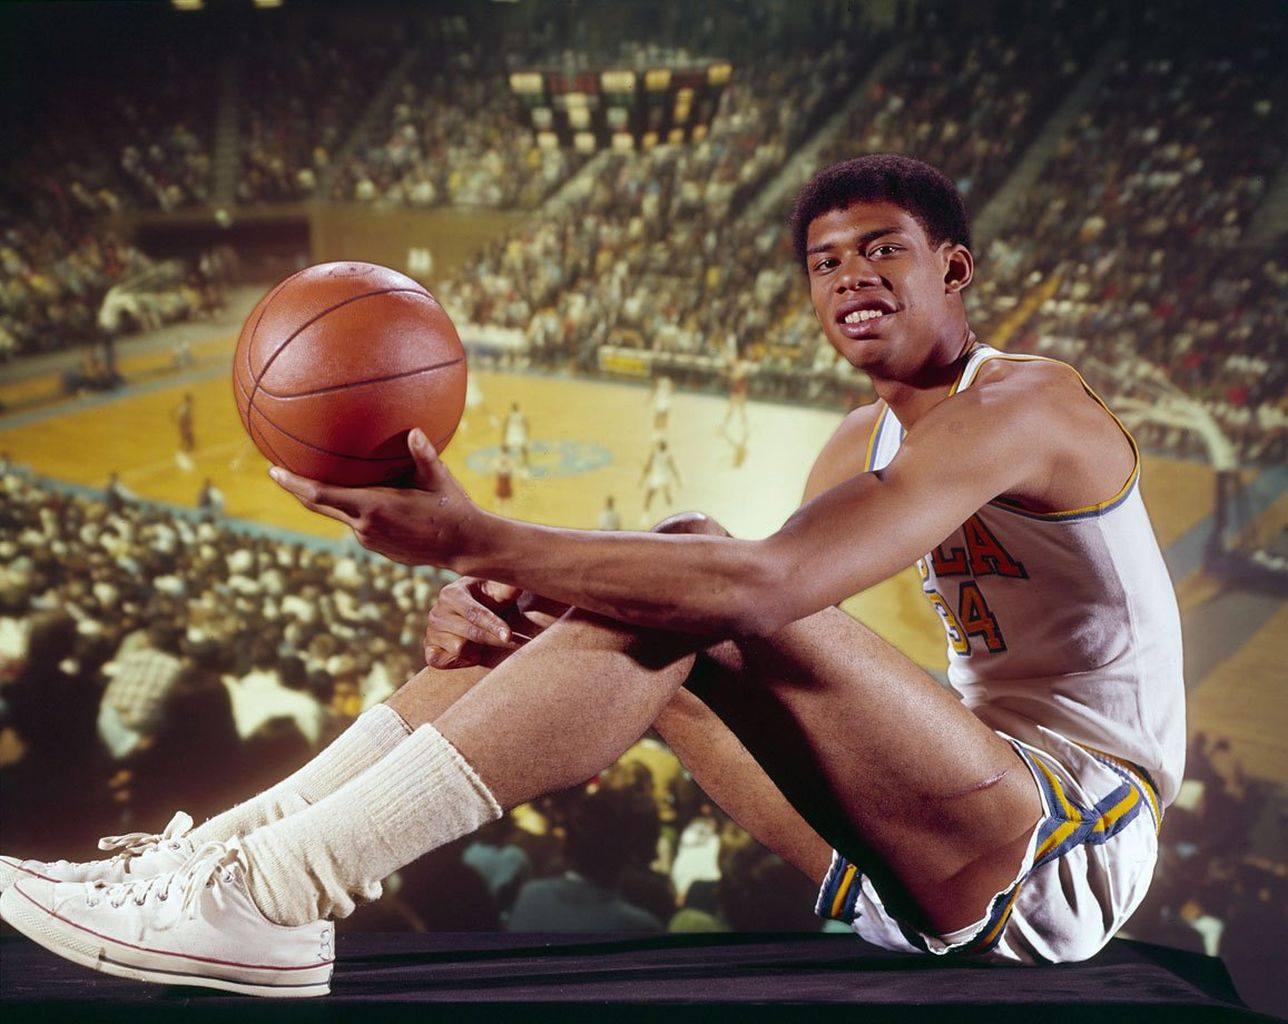 Happy Birthday to Kareem Abdul-Jabbar who turns 72 today! Pictured here when he was playing basketball at UCLA. 